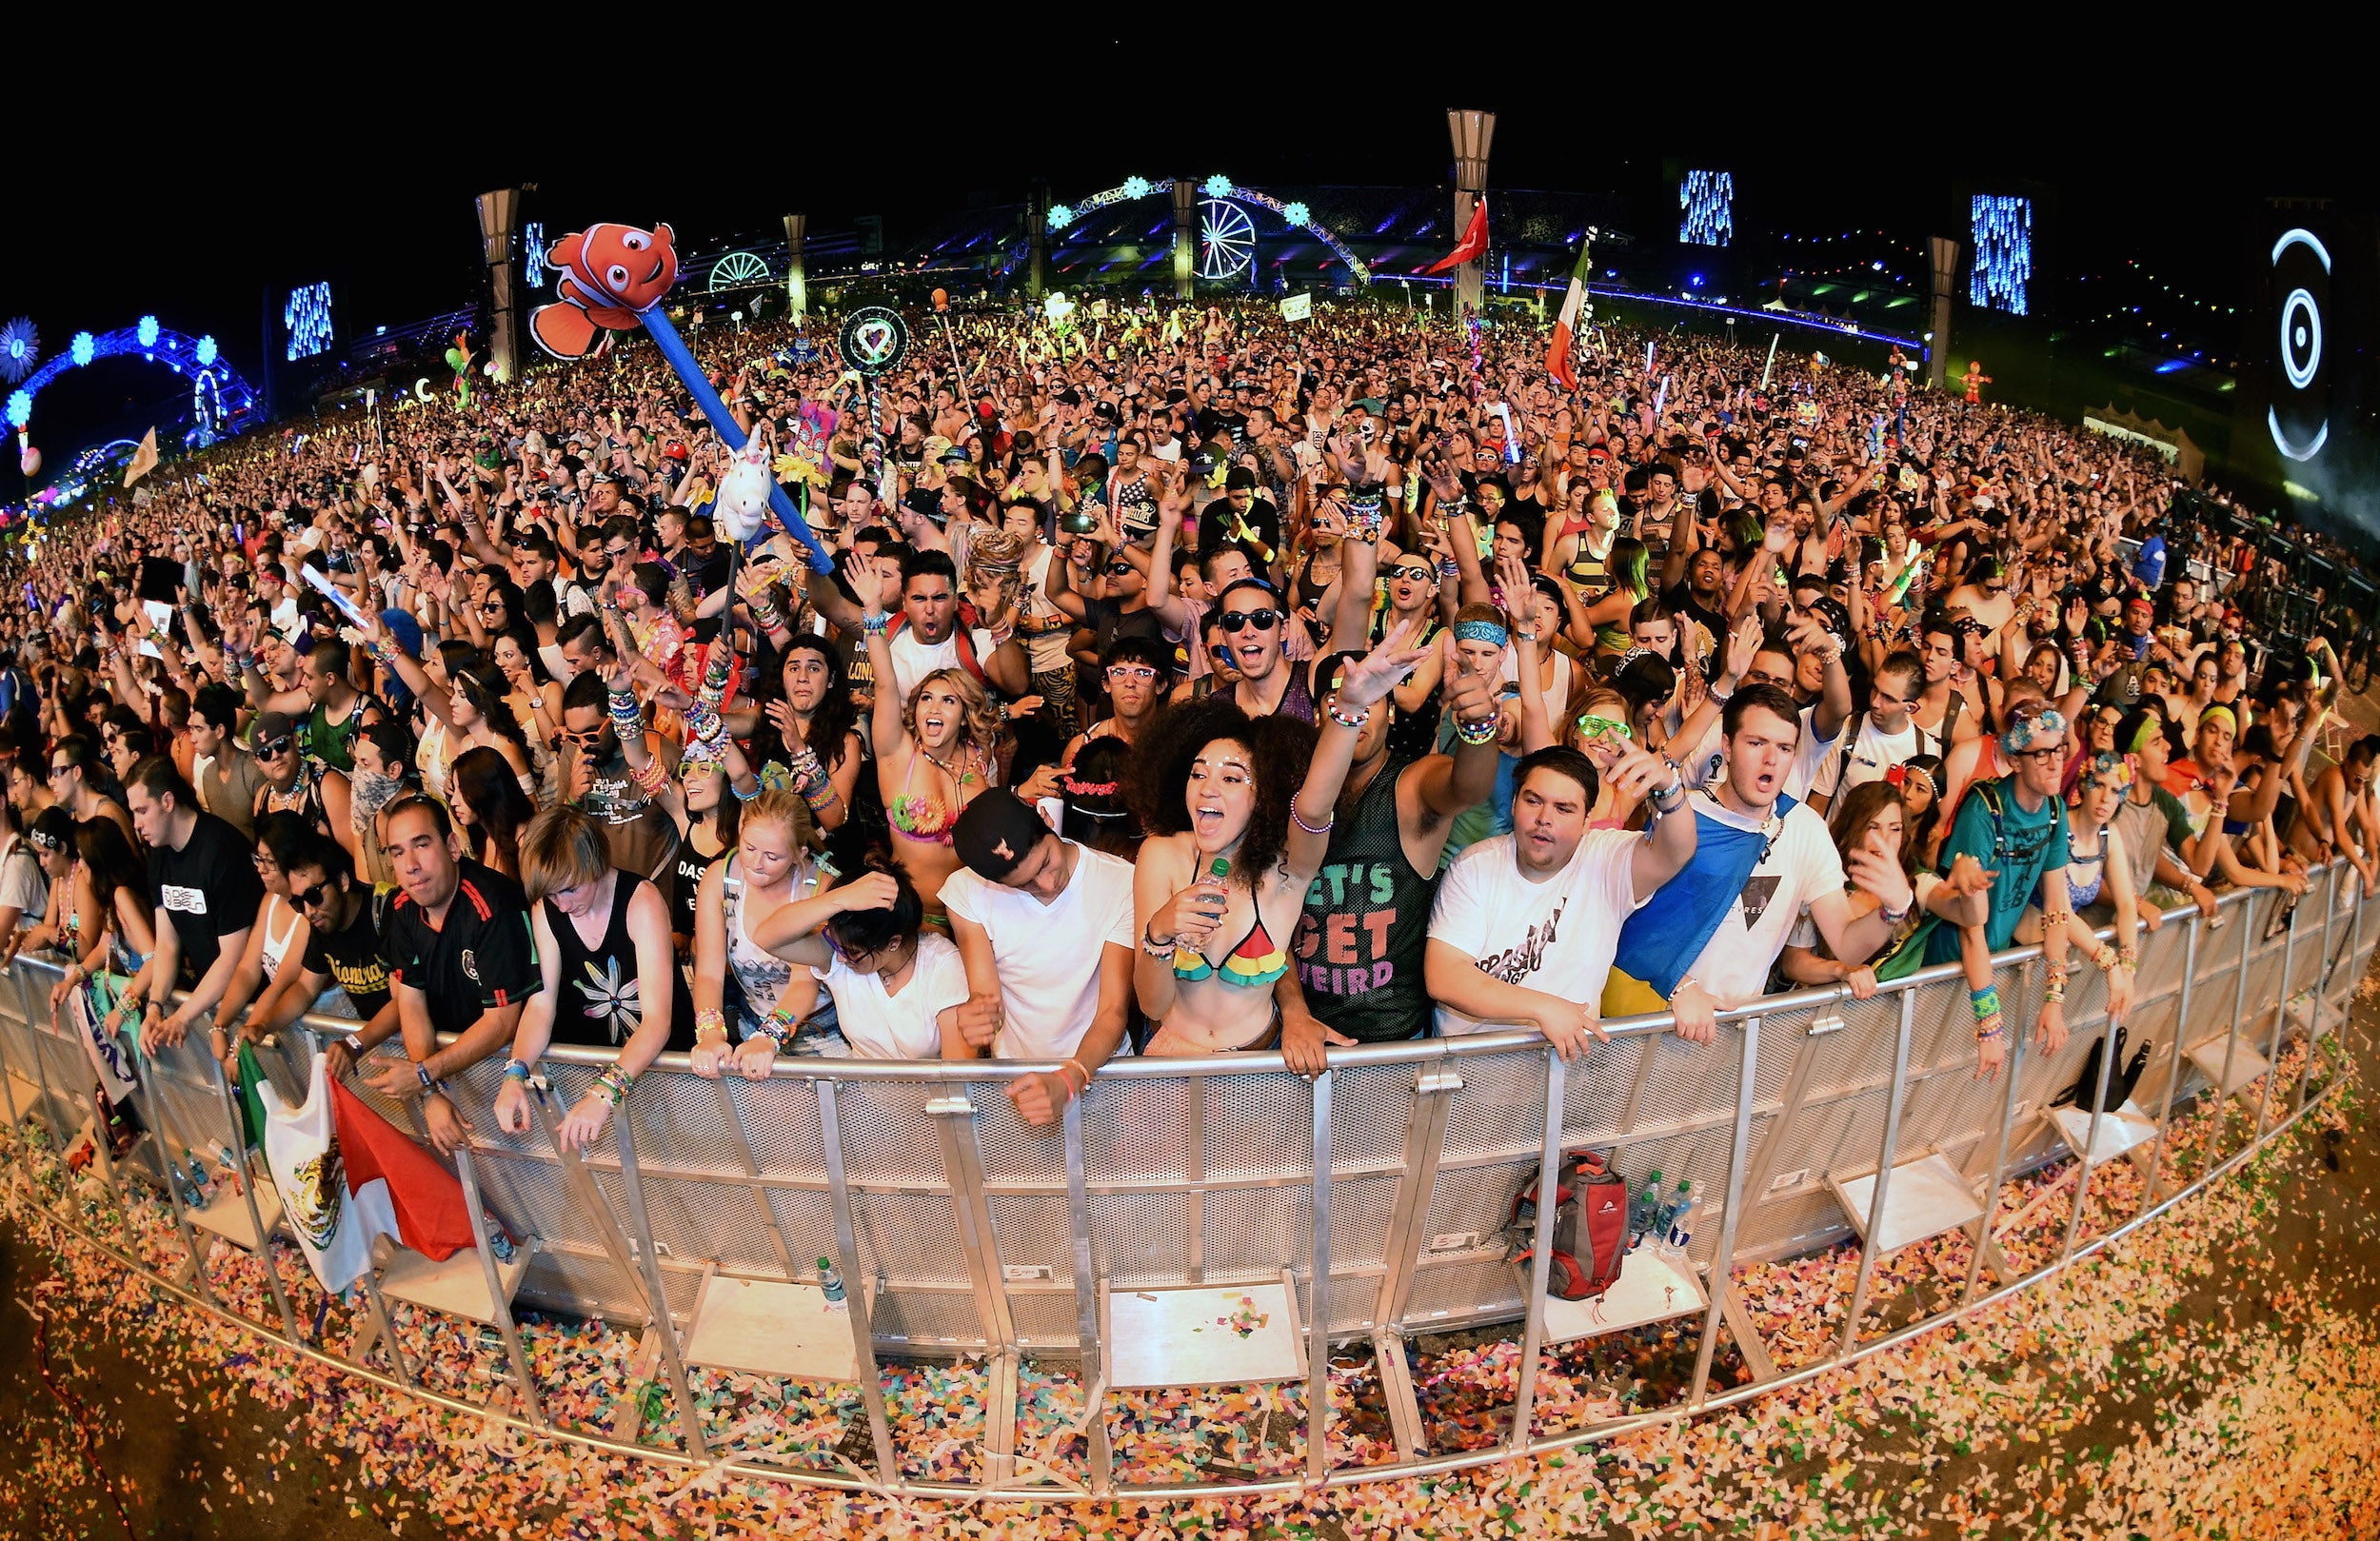 Music lovers enjoy the Electric Daisy Carnival in Las Vegas